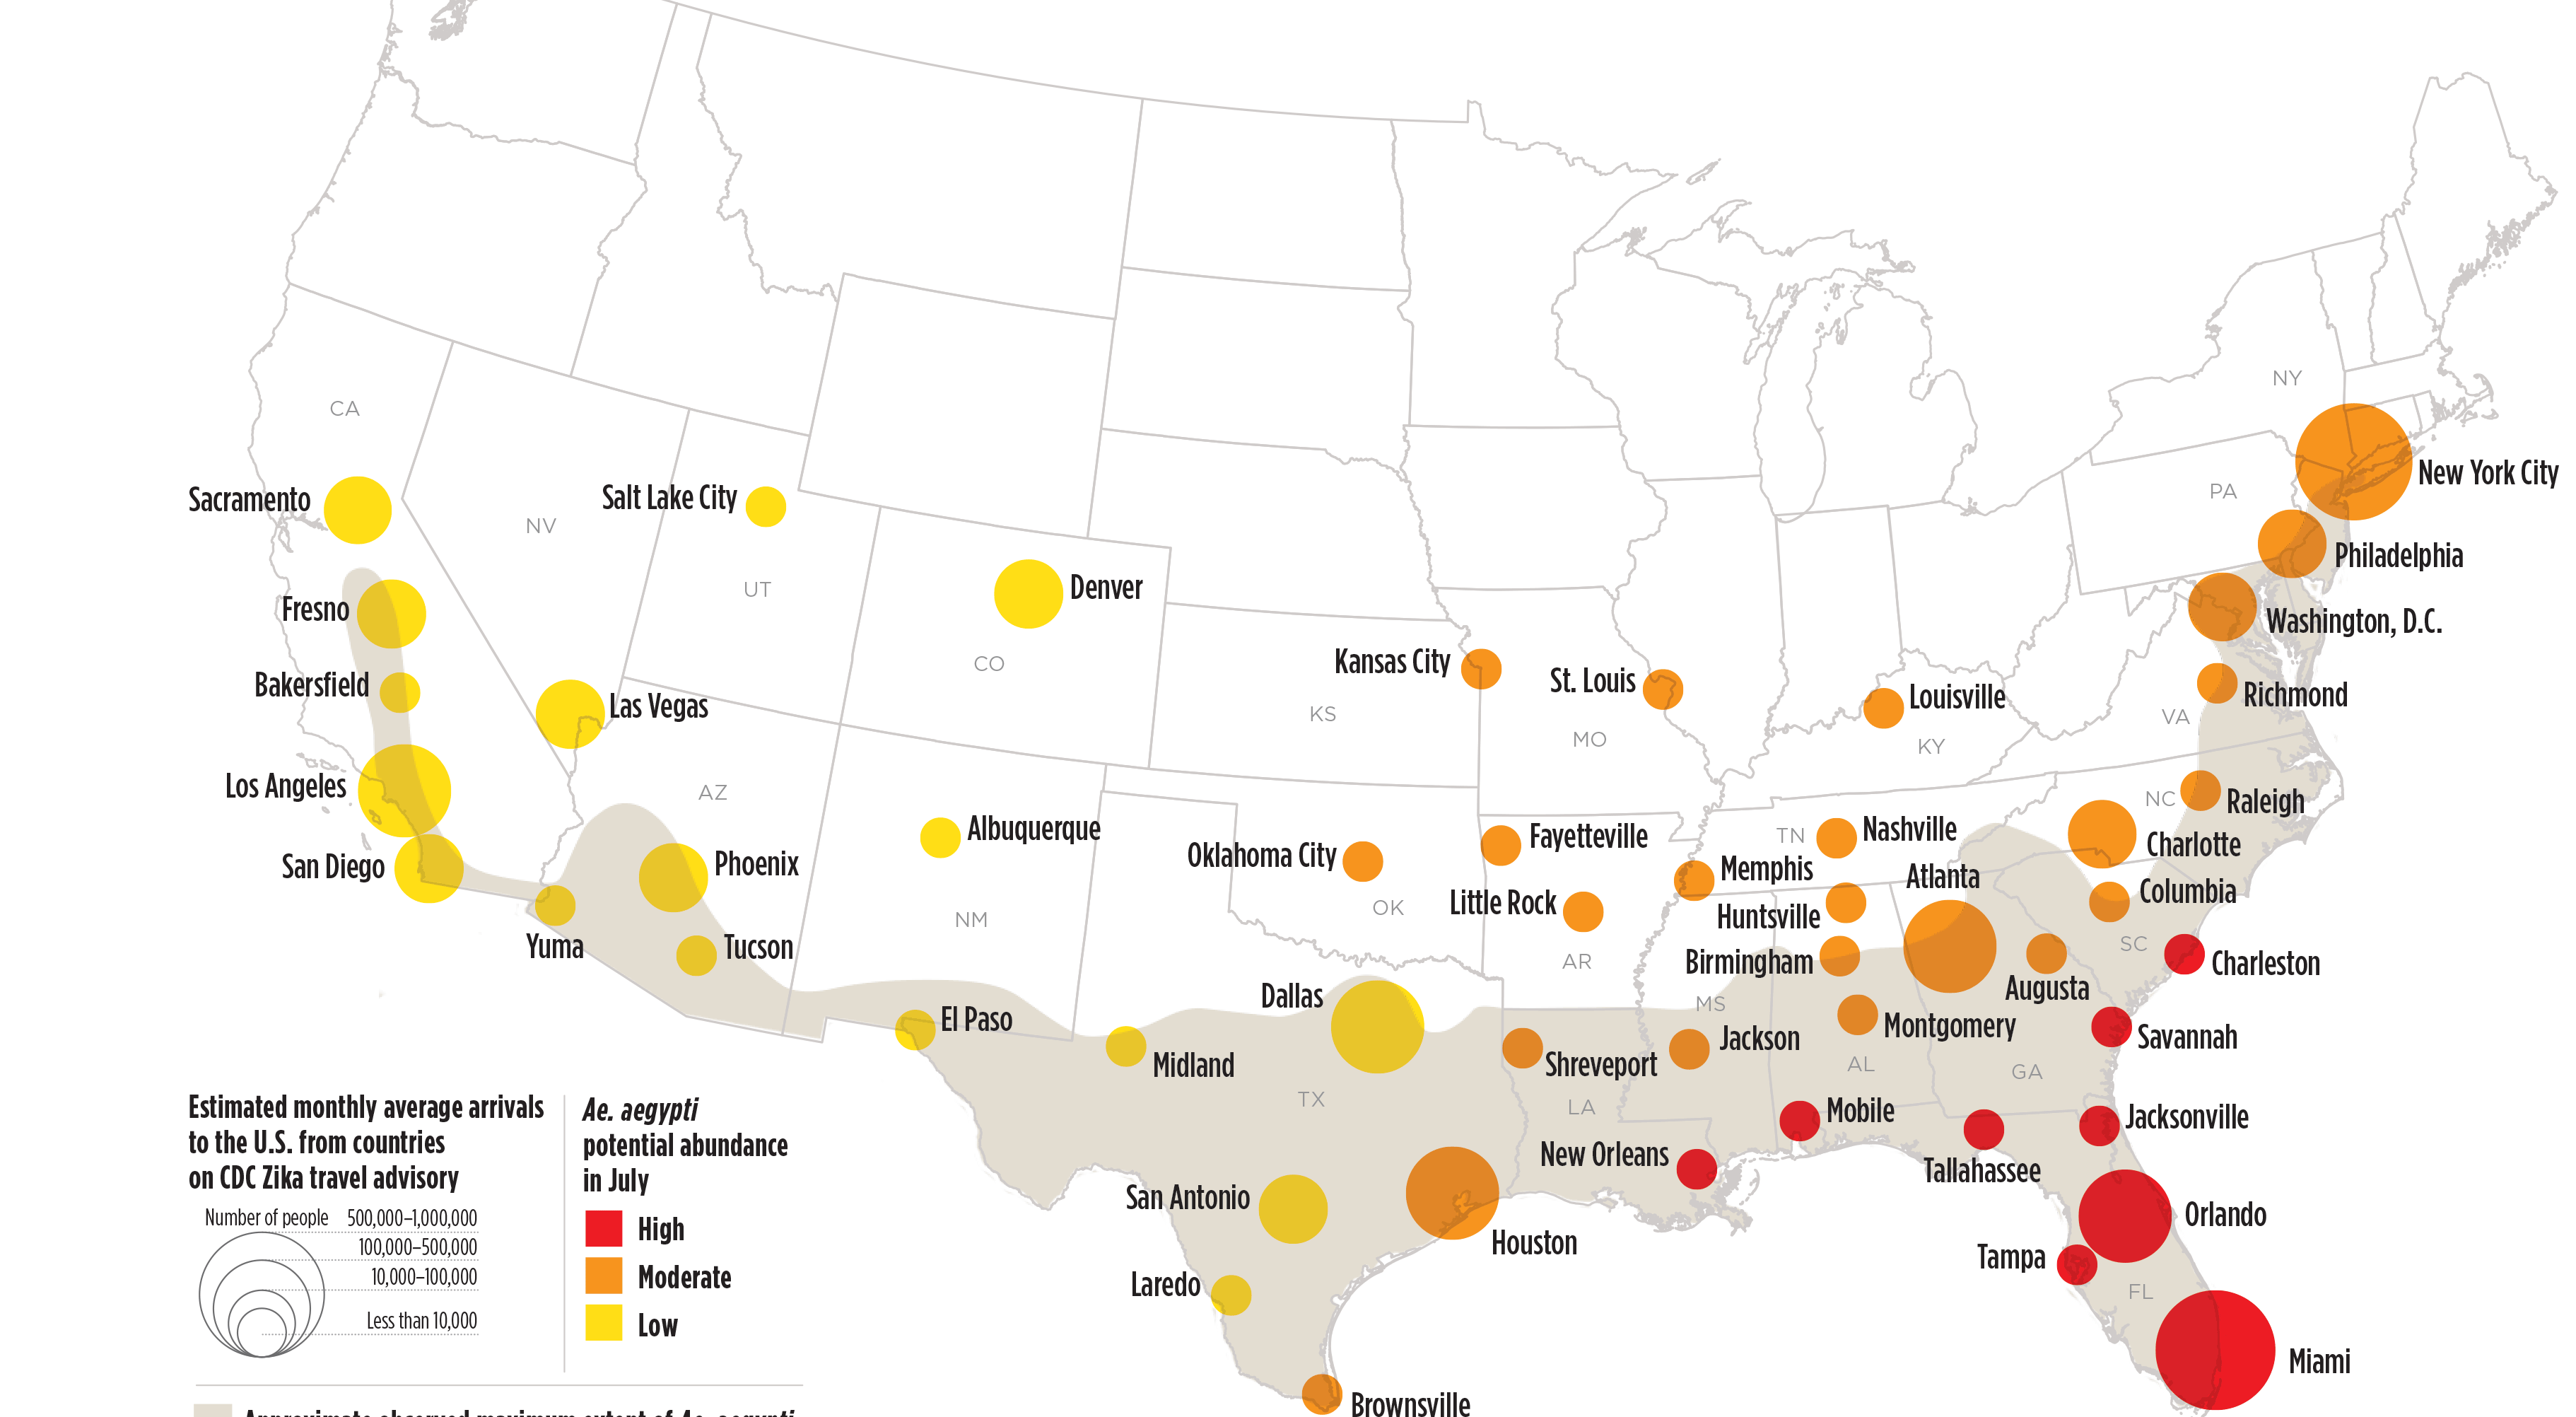  map of risk in 50 cities